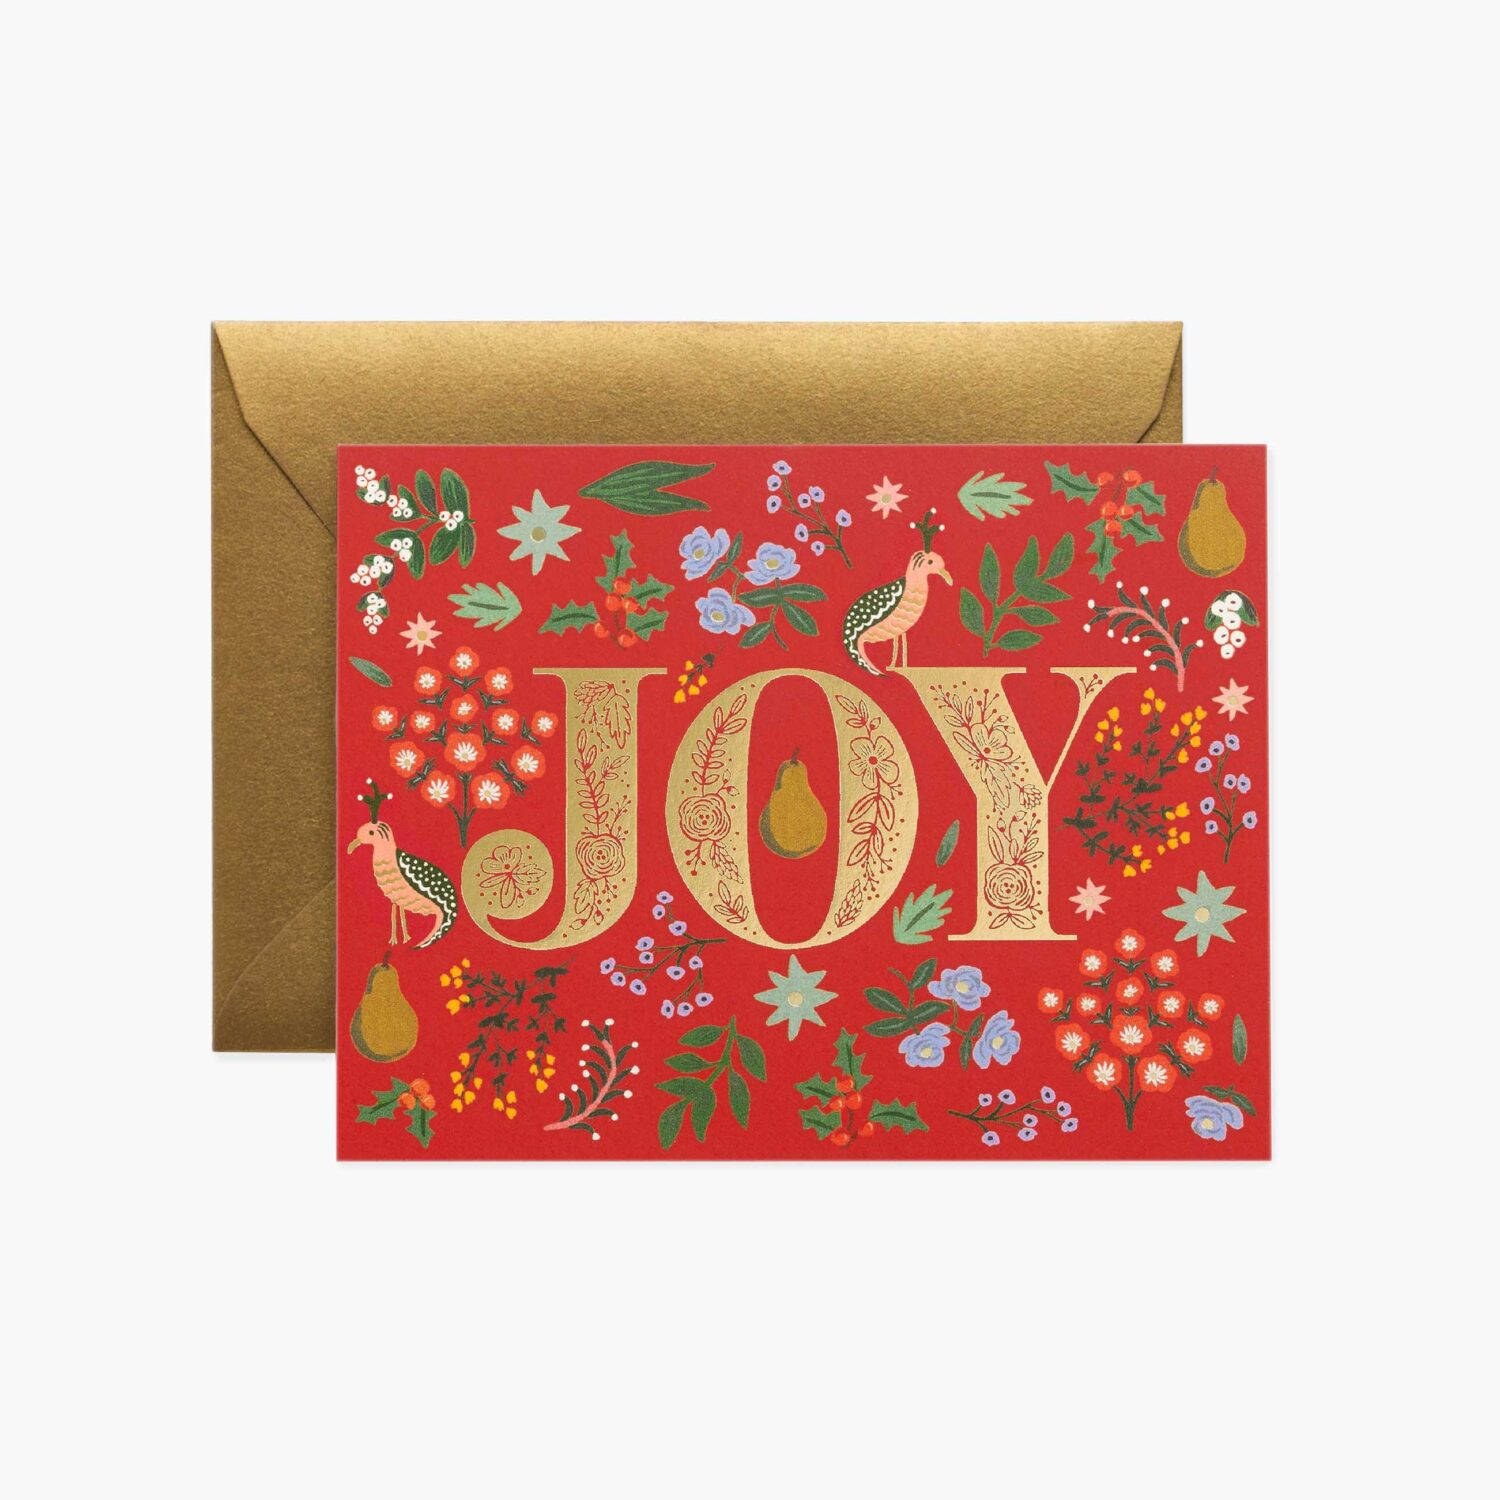 Rifle Paper Co. "Partridge" Christmas Card